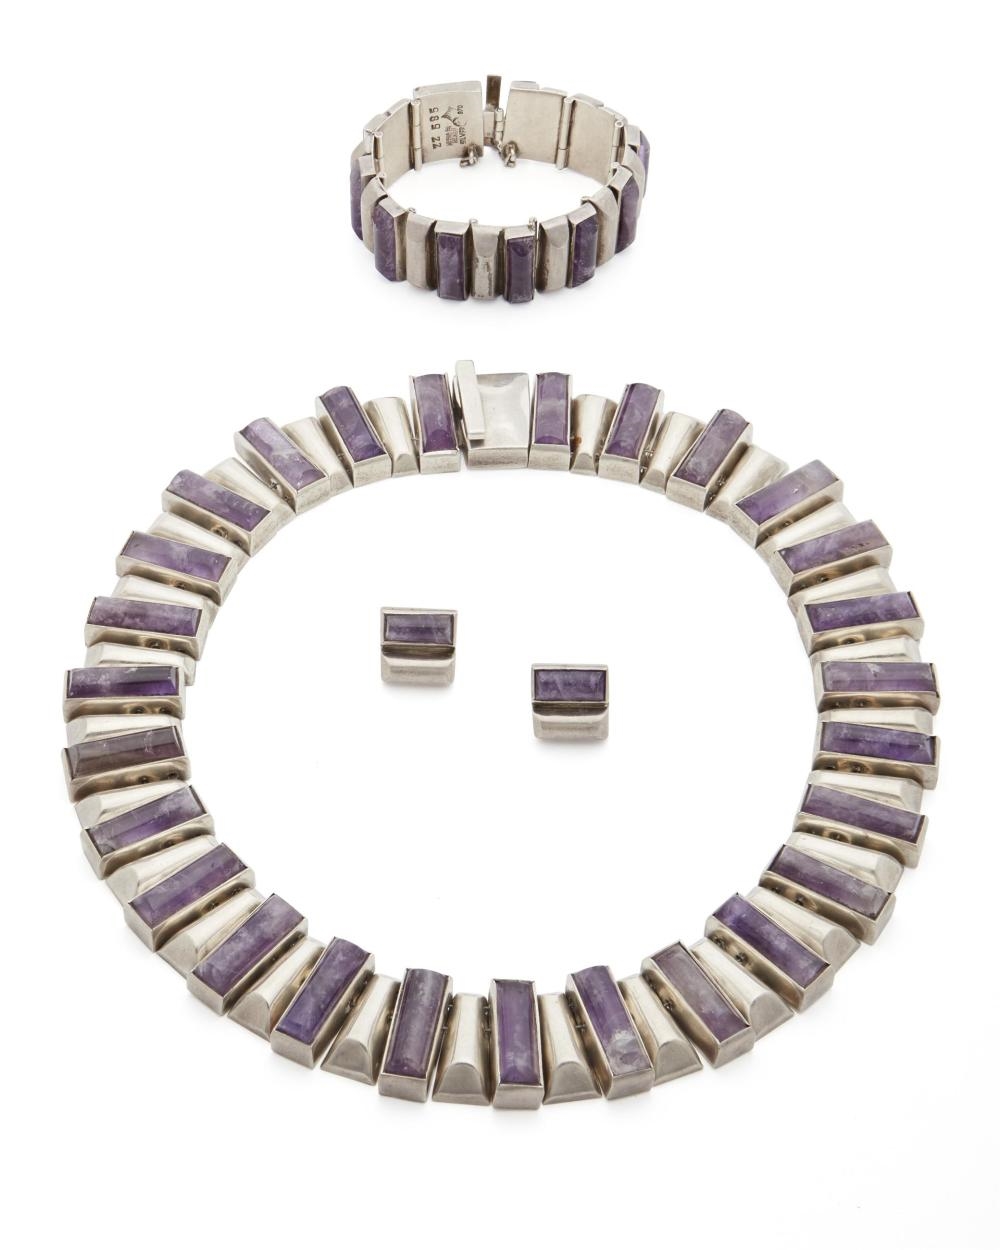 A suite of Antonio Pineda silver and amethyst jewelry by Antonio Pineda, 1953-1979